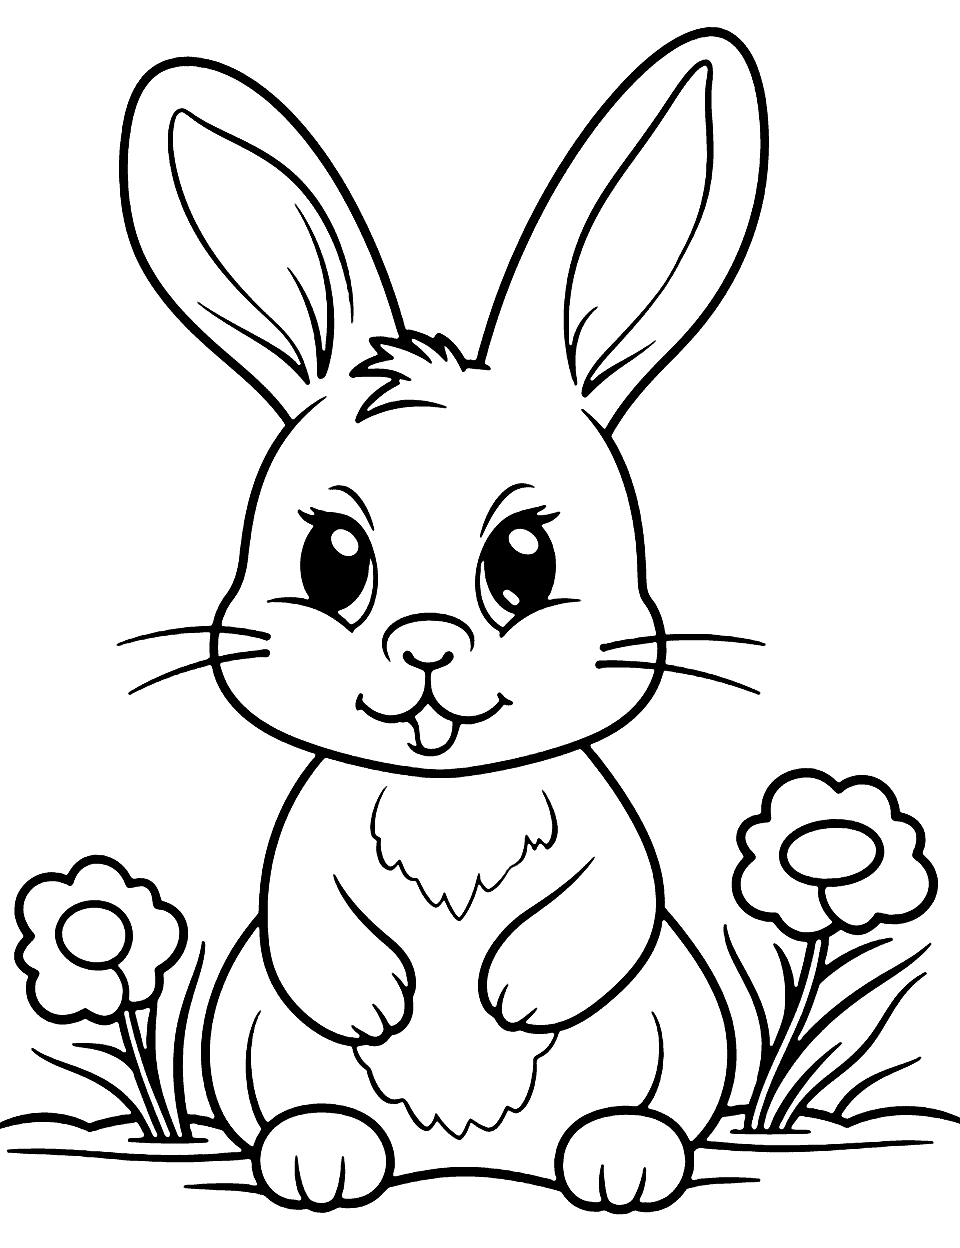 Simple Bunny Easter Coloring Page - A basic outline of a bunny for younger kids to practice their coloring skills.